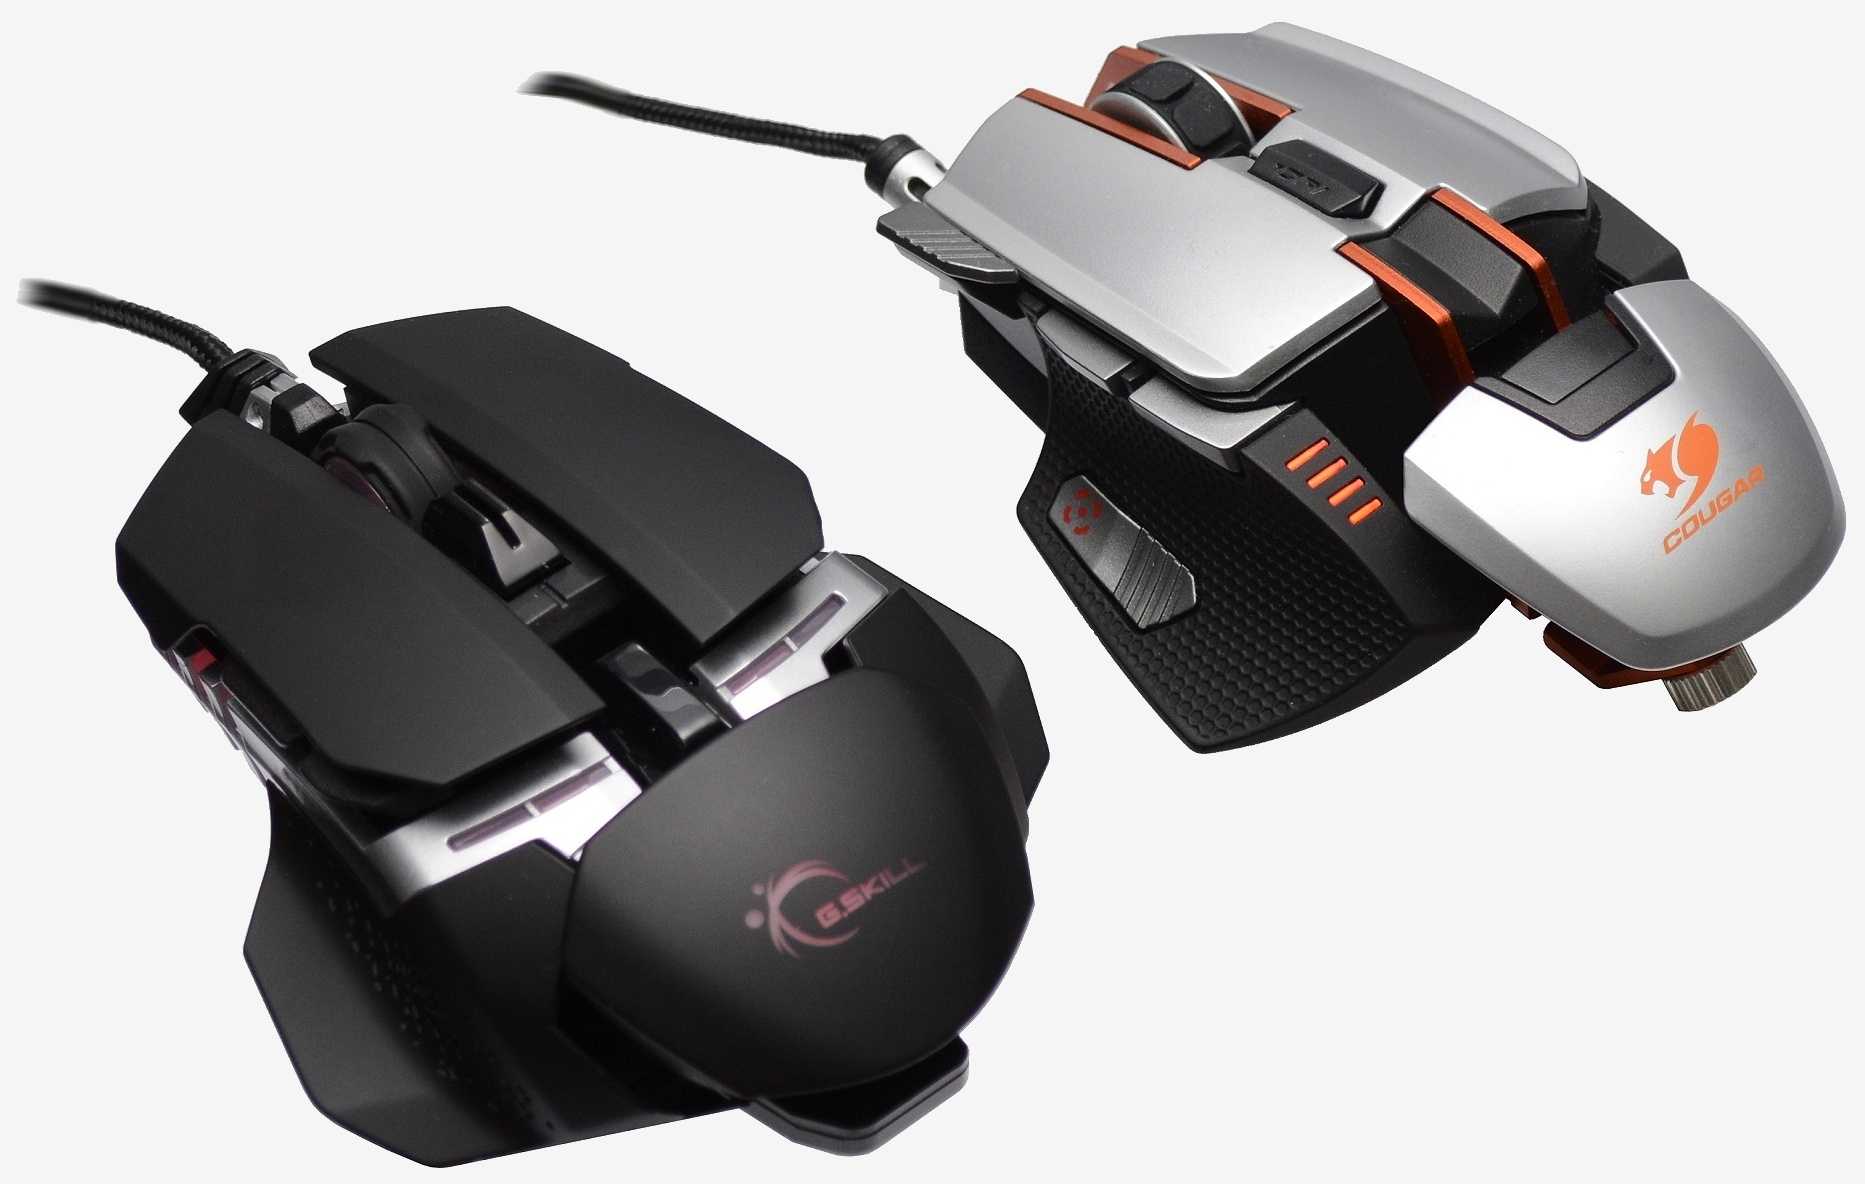 G.skill ripjaws mx780 laser gaming mouse review